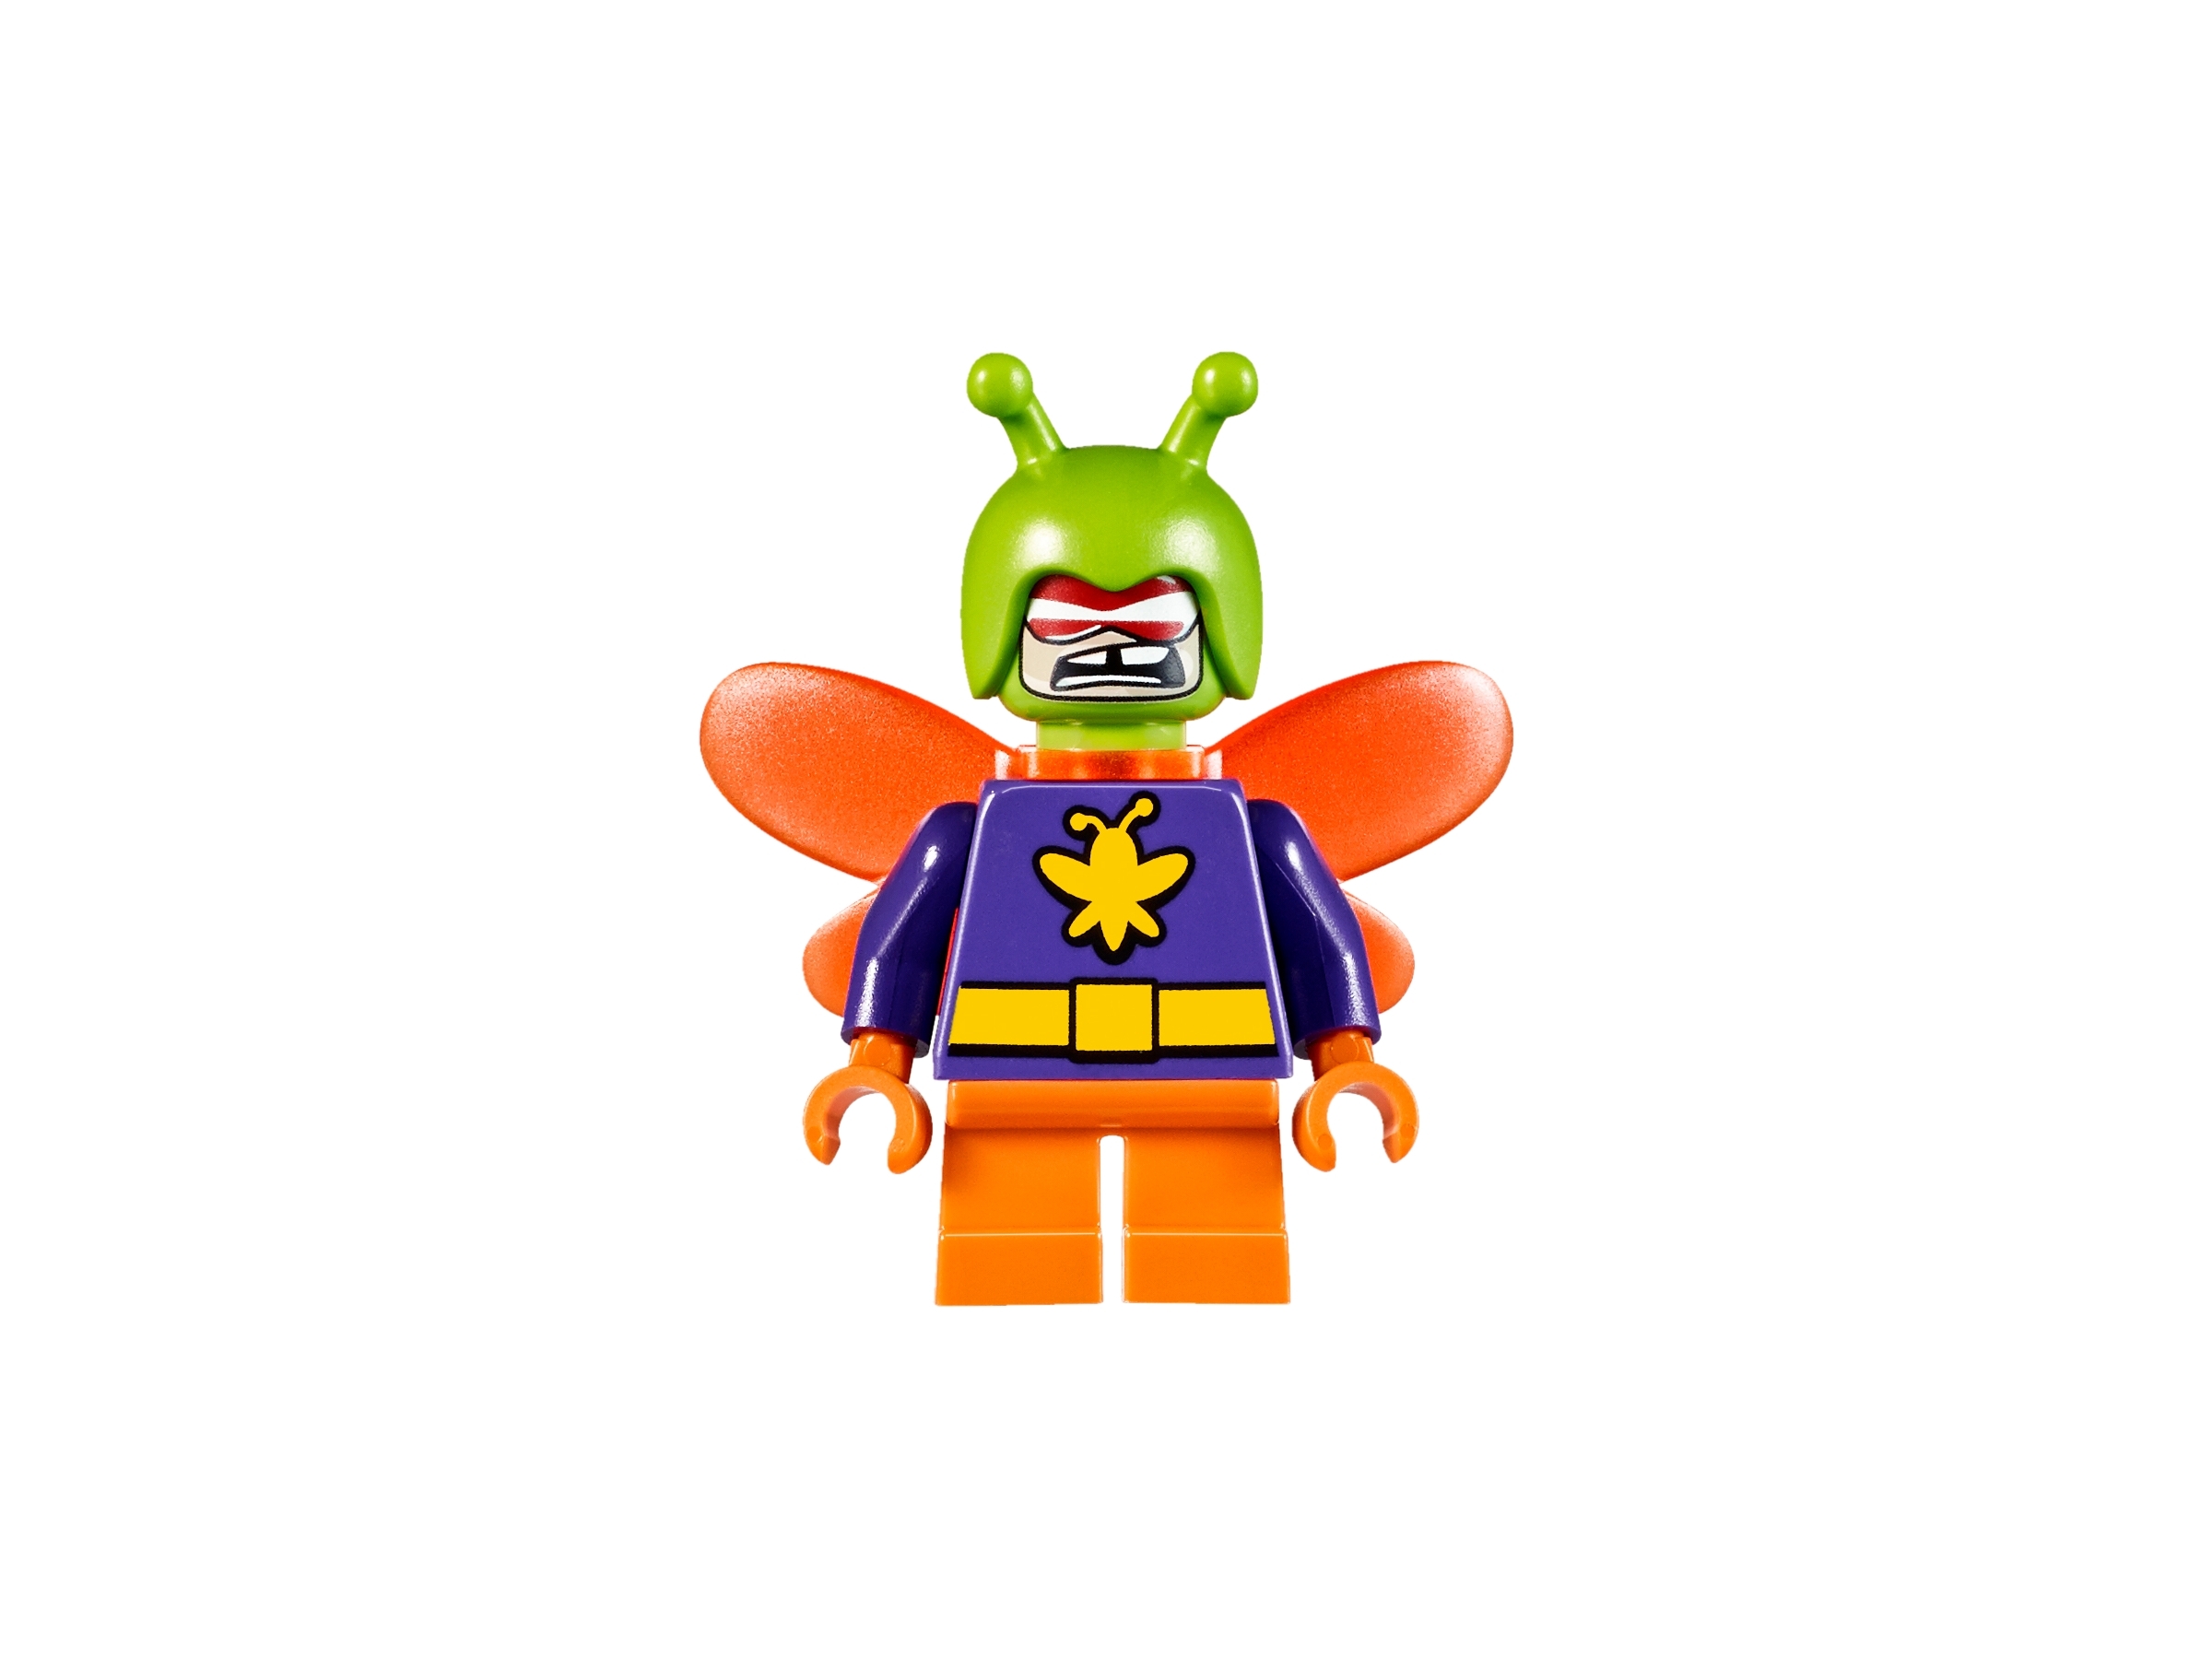 Details about   NEW LEGO DC Mighty Micros Killer Moth minifigure from set 76069 